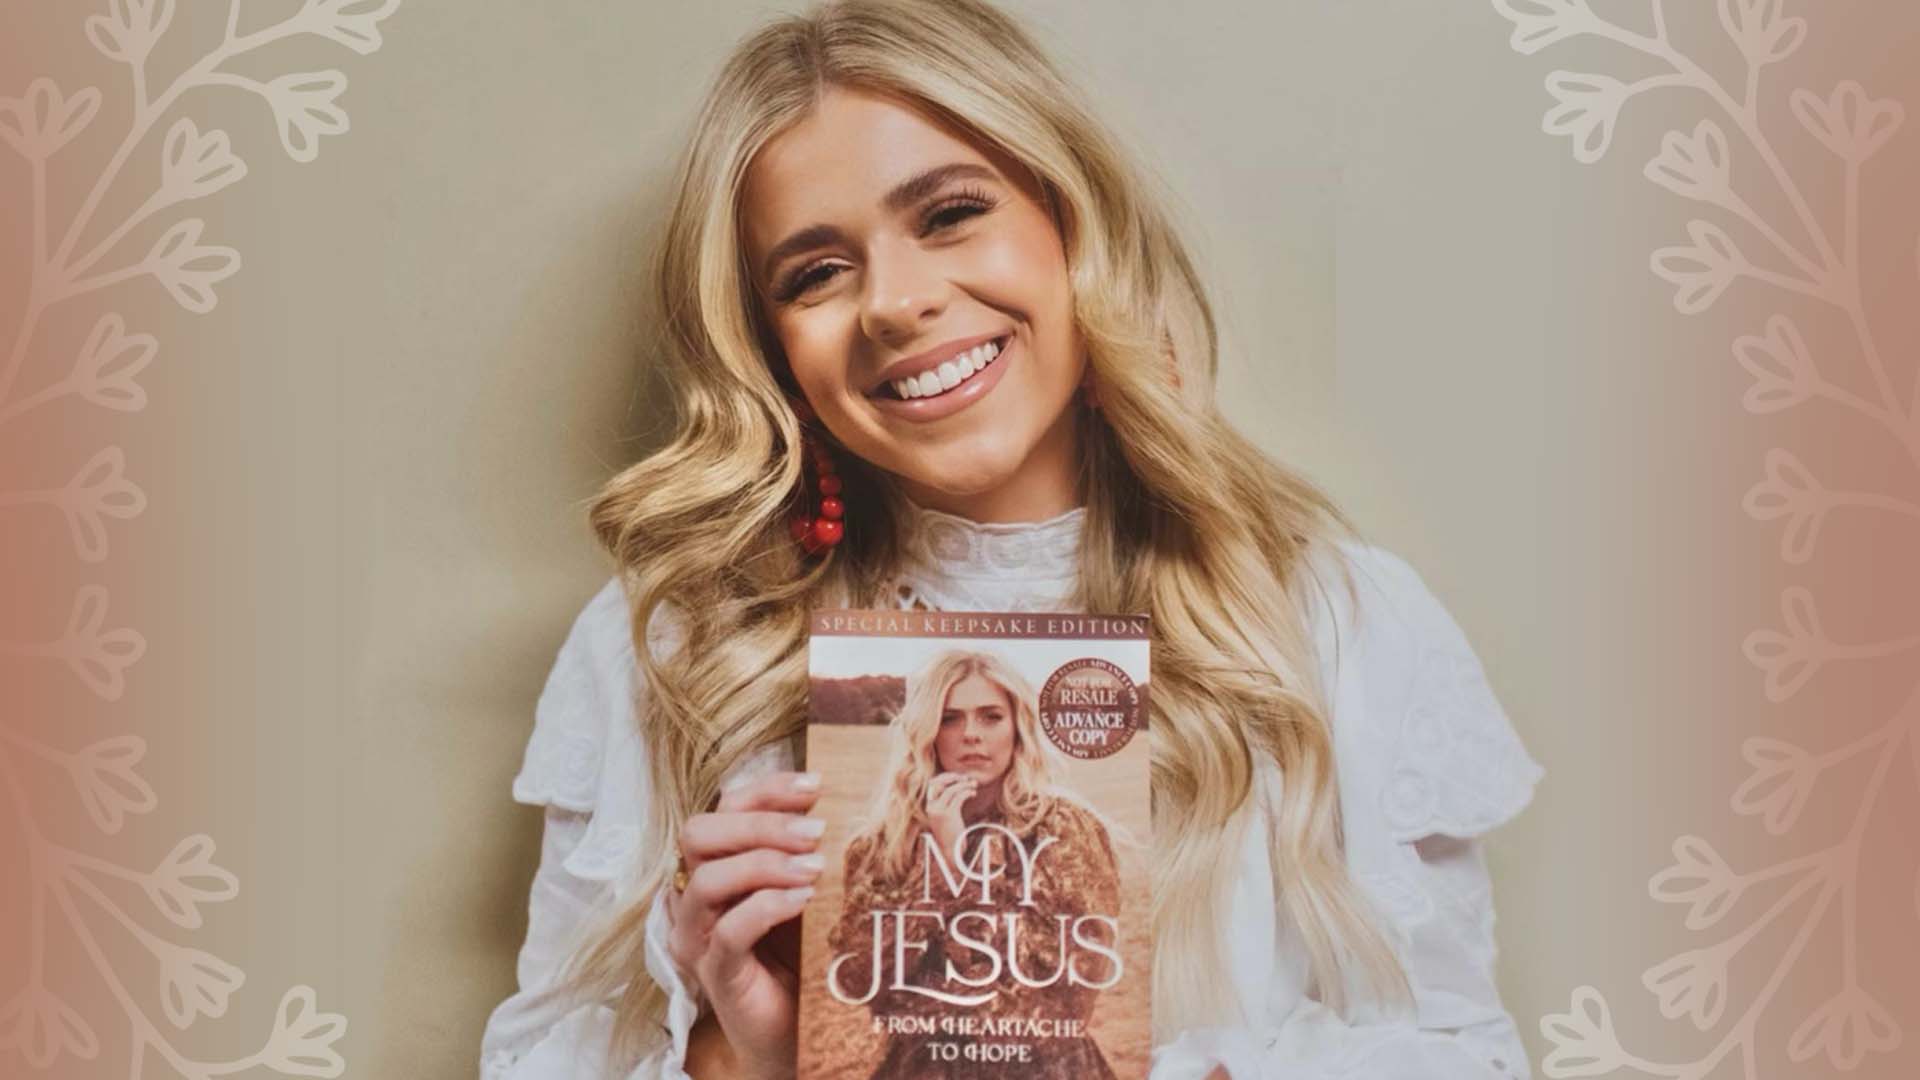 Anne Wilson releases her first book "My Jesus: From Heartache to Hope"